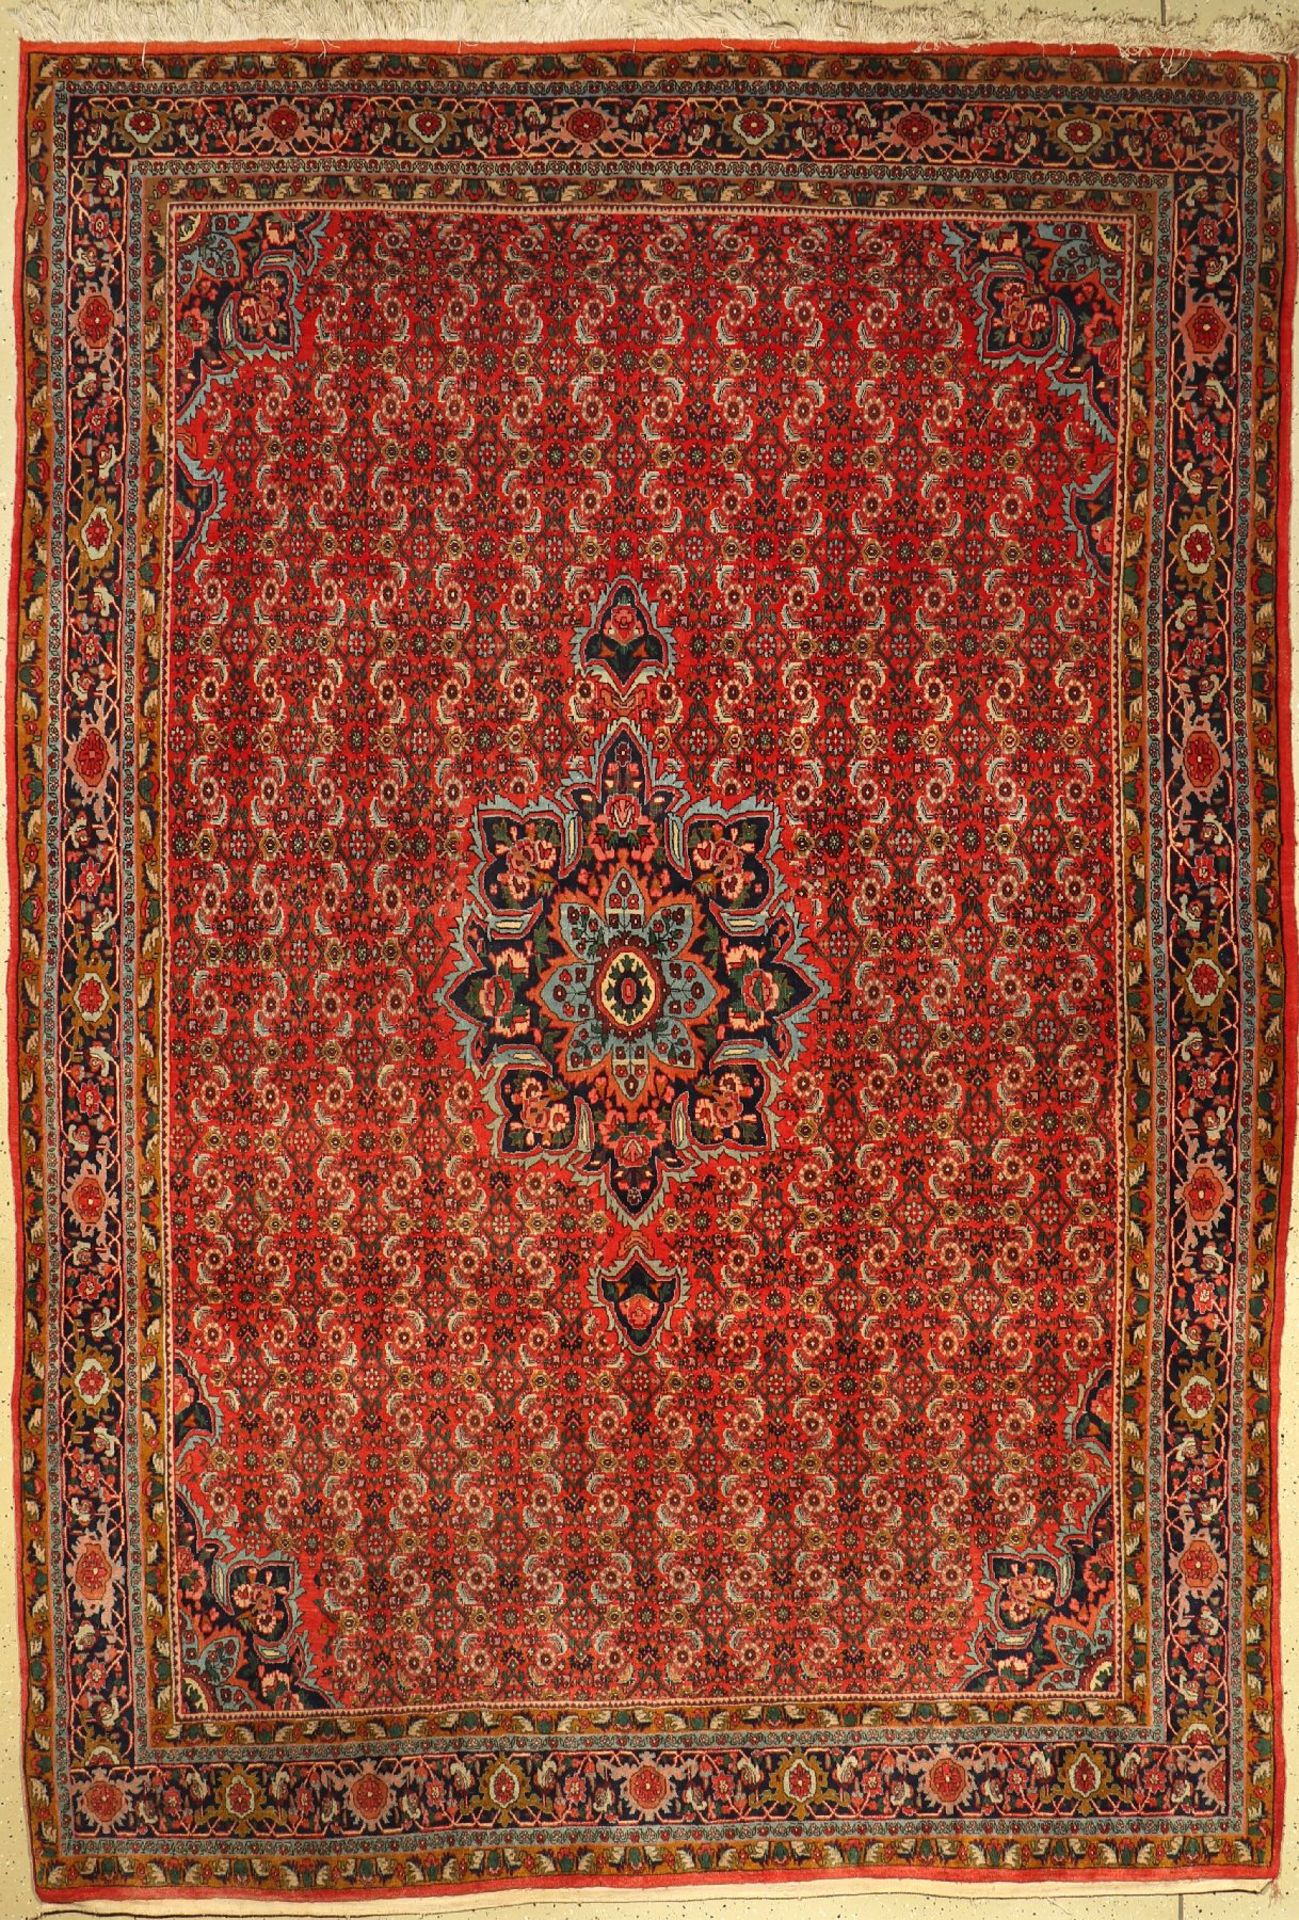 Bidjar old, Persia, approx. 60 years, wool on cotton, approx. 325 x 225 cm, condition: 2-3. Auction: